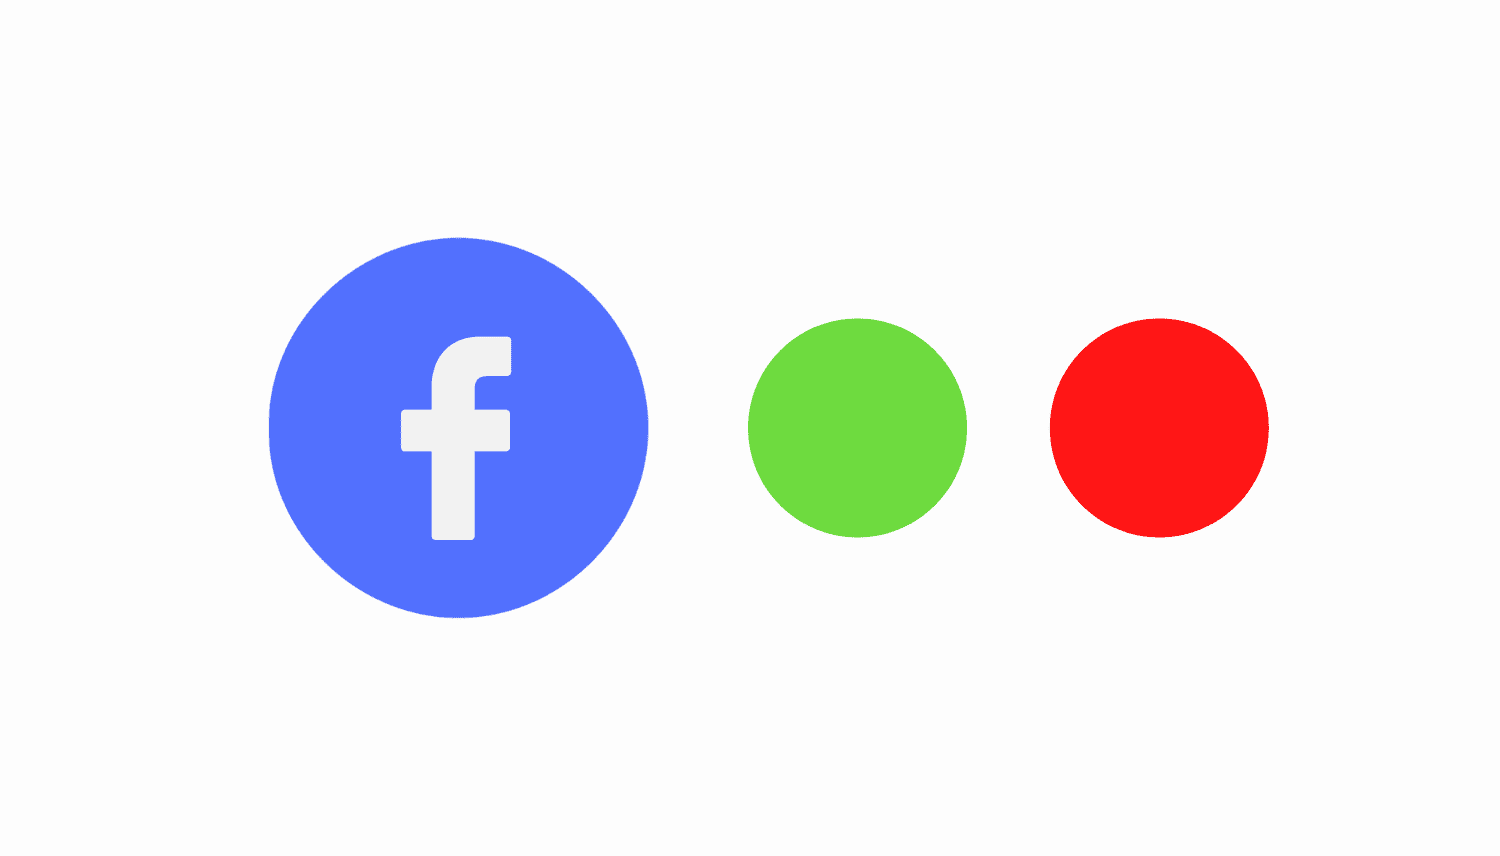 Round Facebook logo with green and red dots representing online and offline status